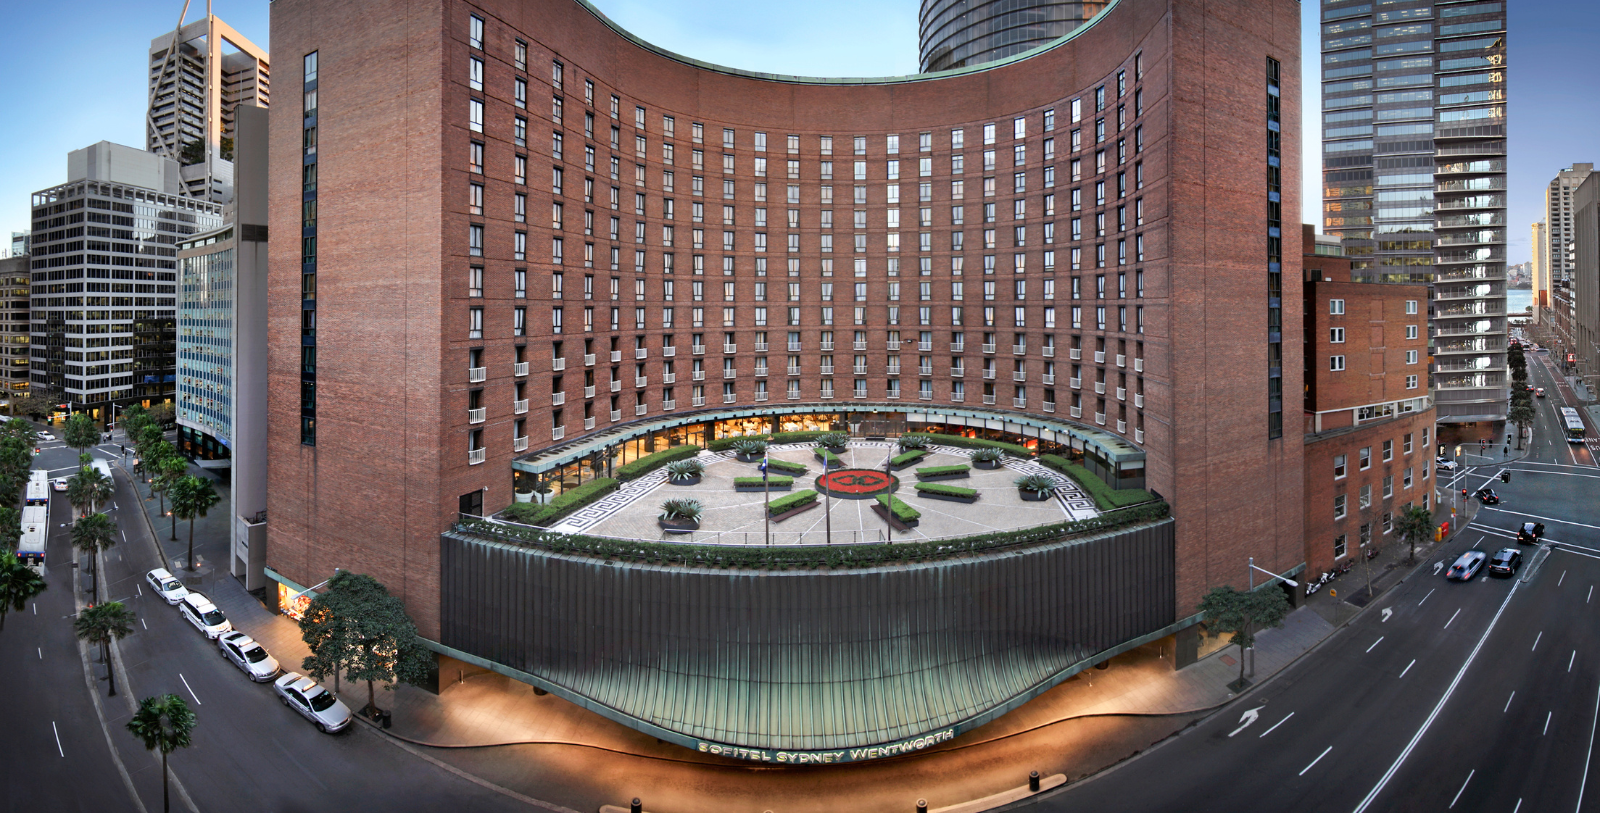 Discover the serene courtyard garden, an oasis of calm sheltered by the hotel's signature curved exterior.